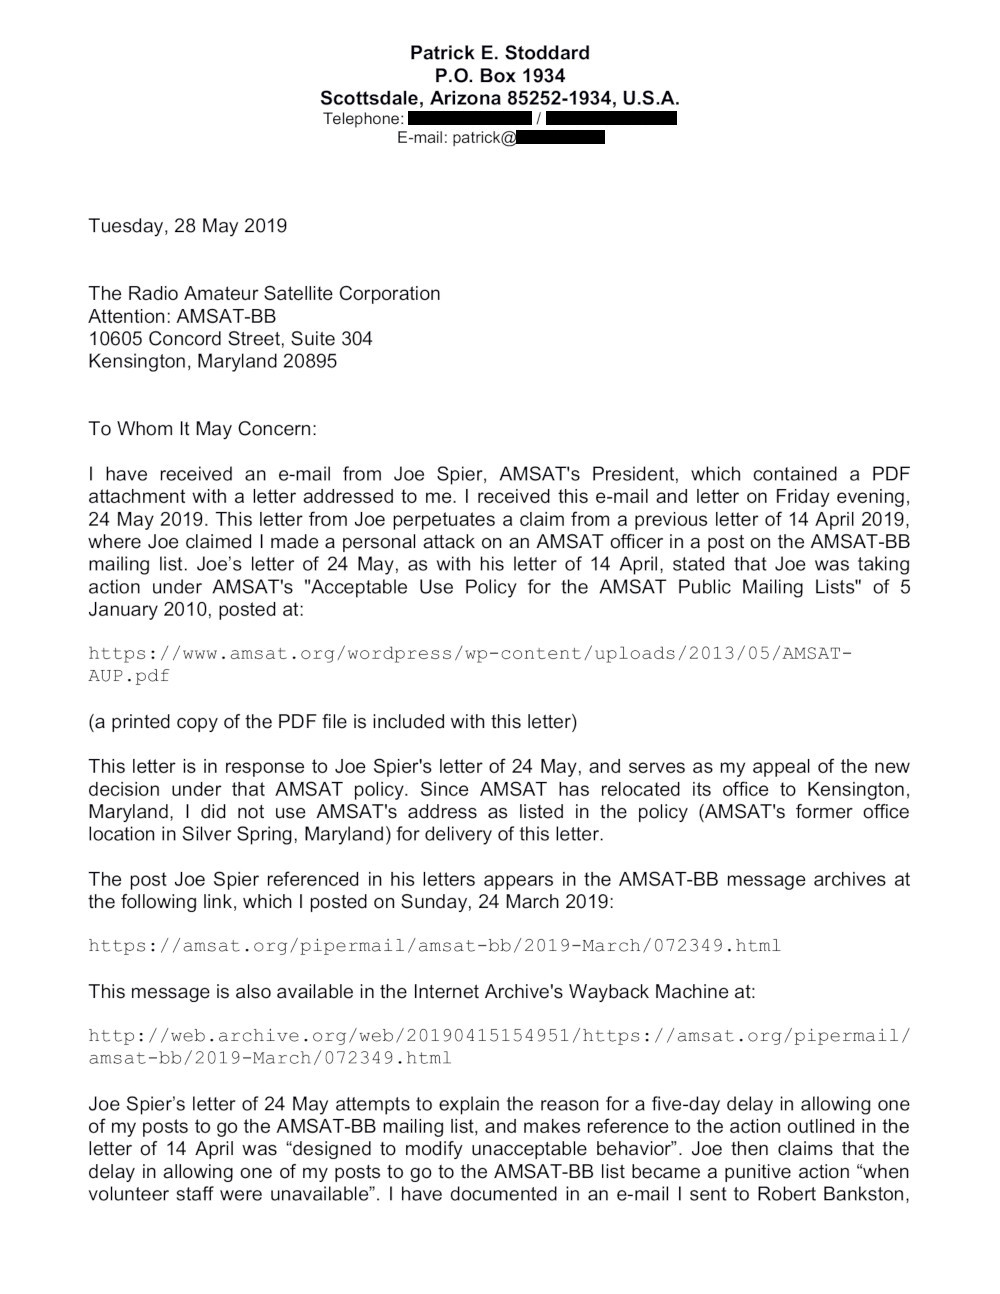 Letter from WD9EWK on 28 May - page 1